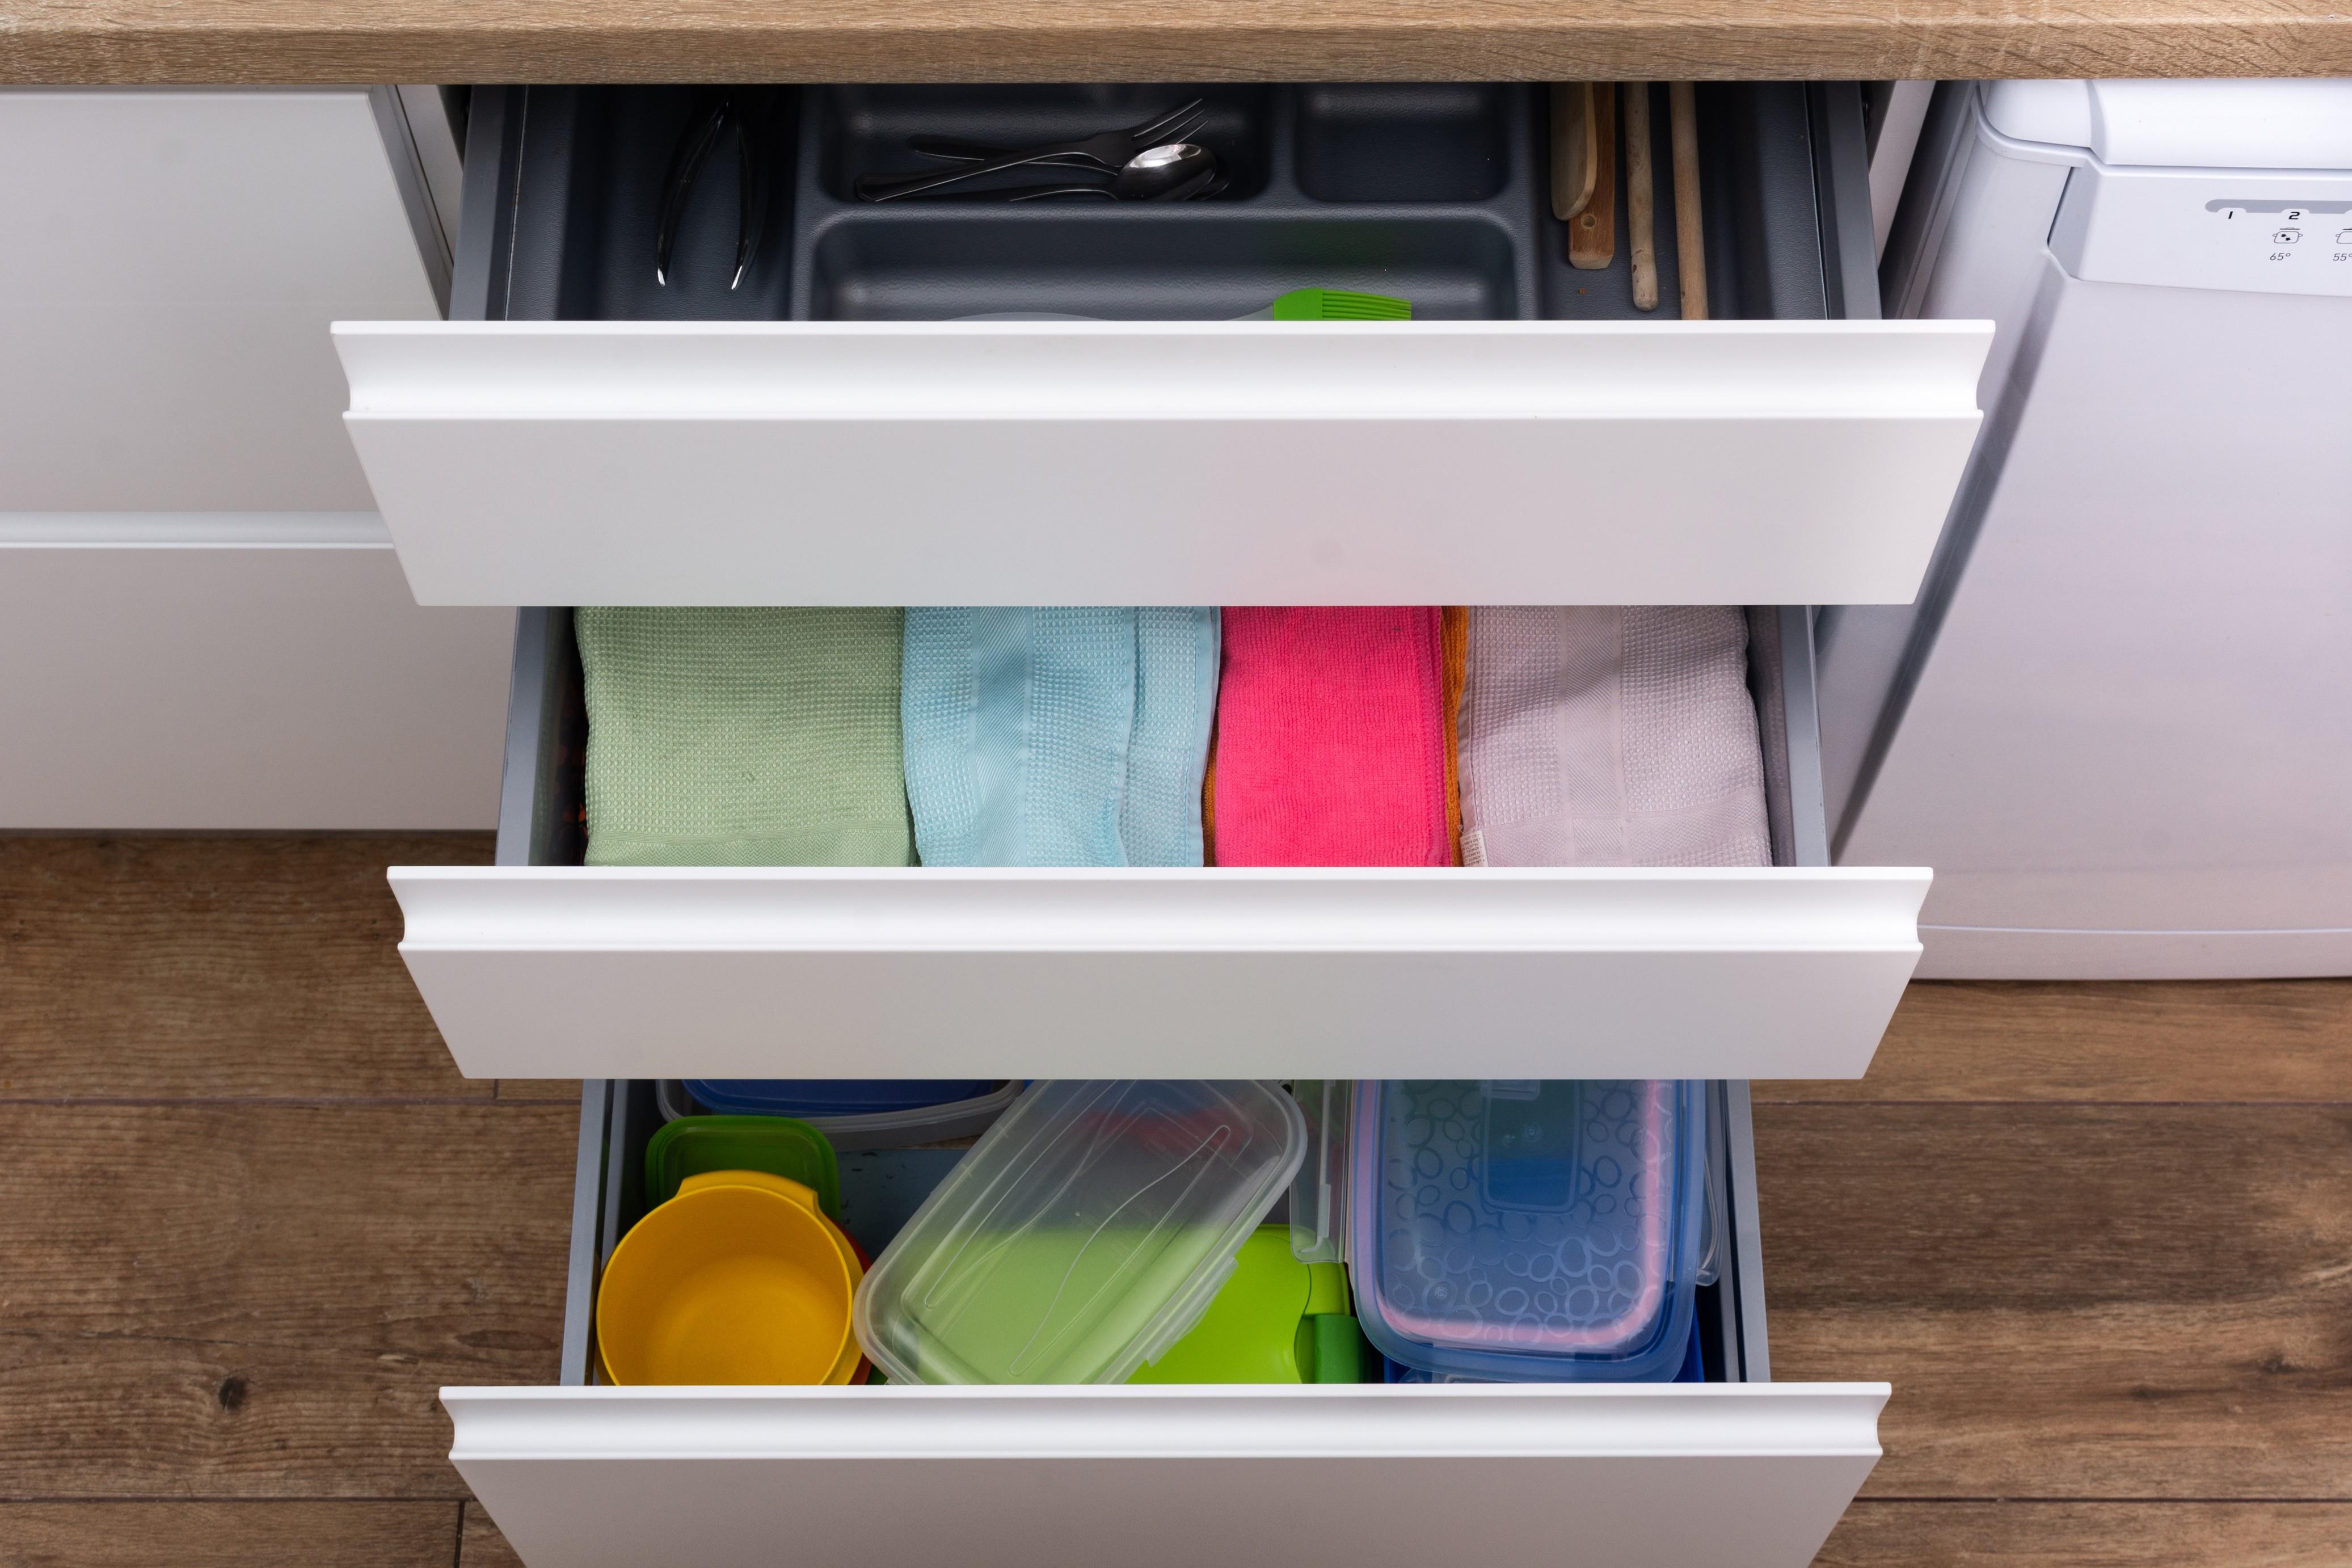 drawer-with-cutlery-kitchen-towels-lunch-boxes (1).jpg